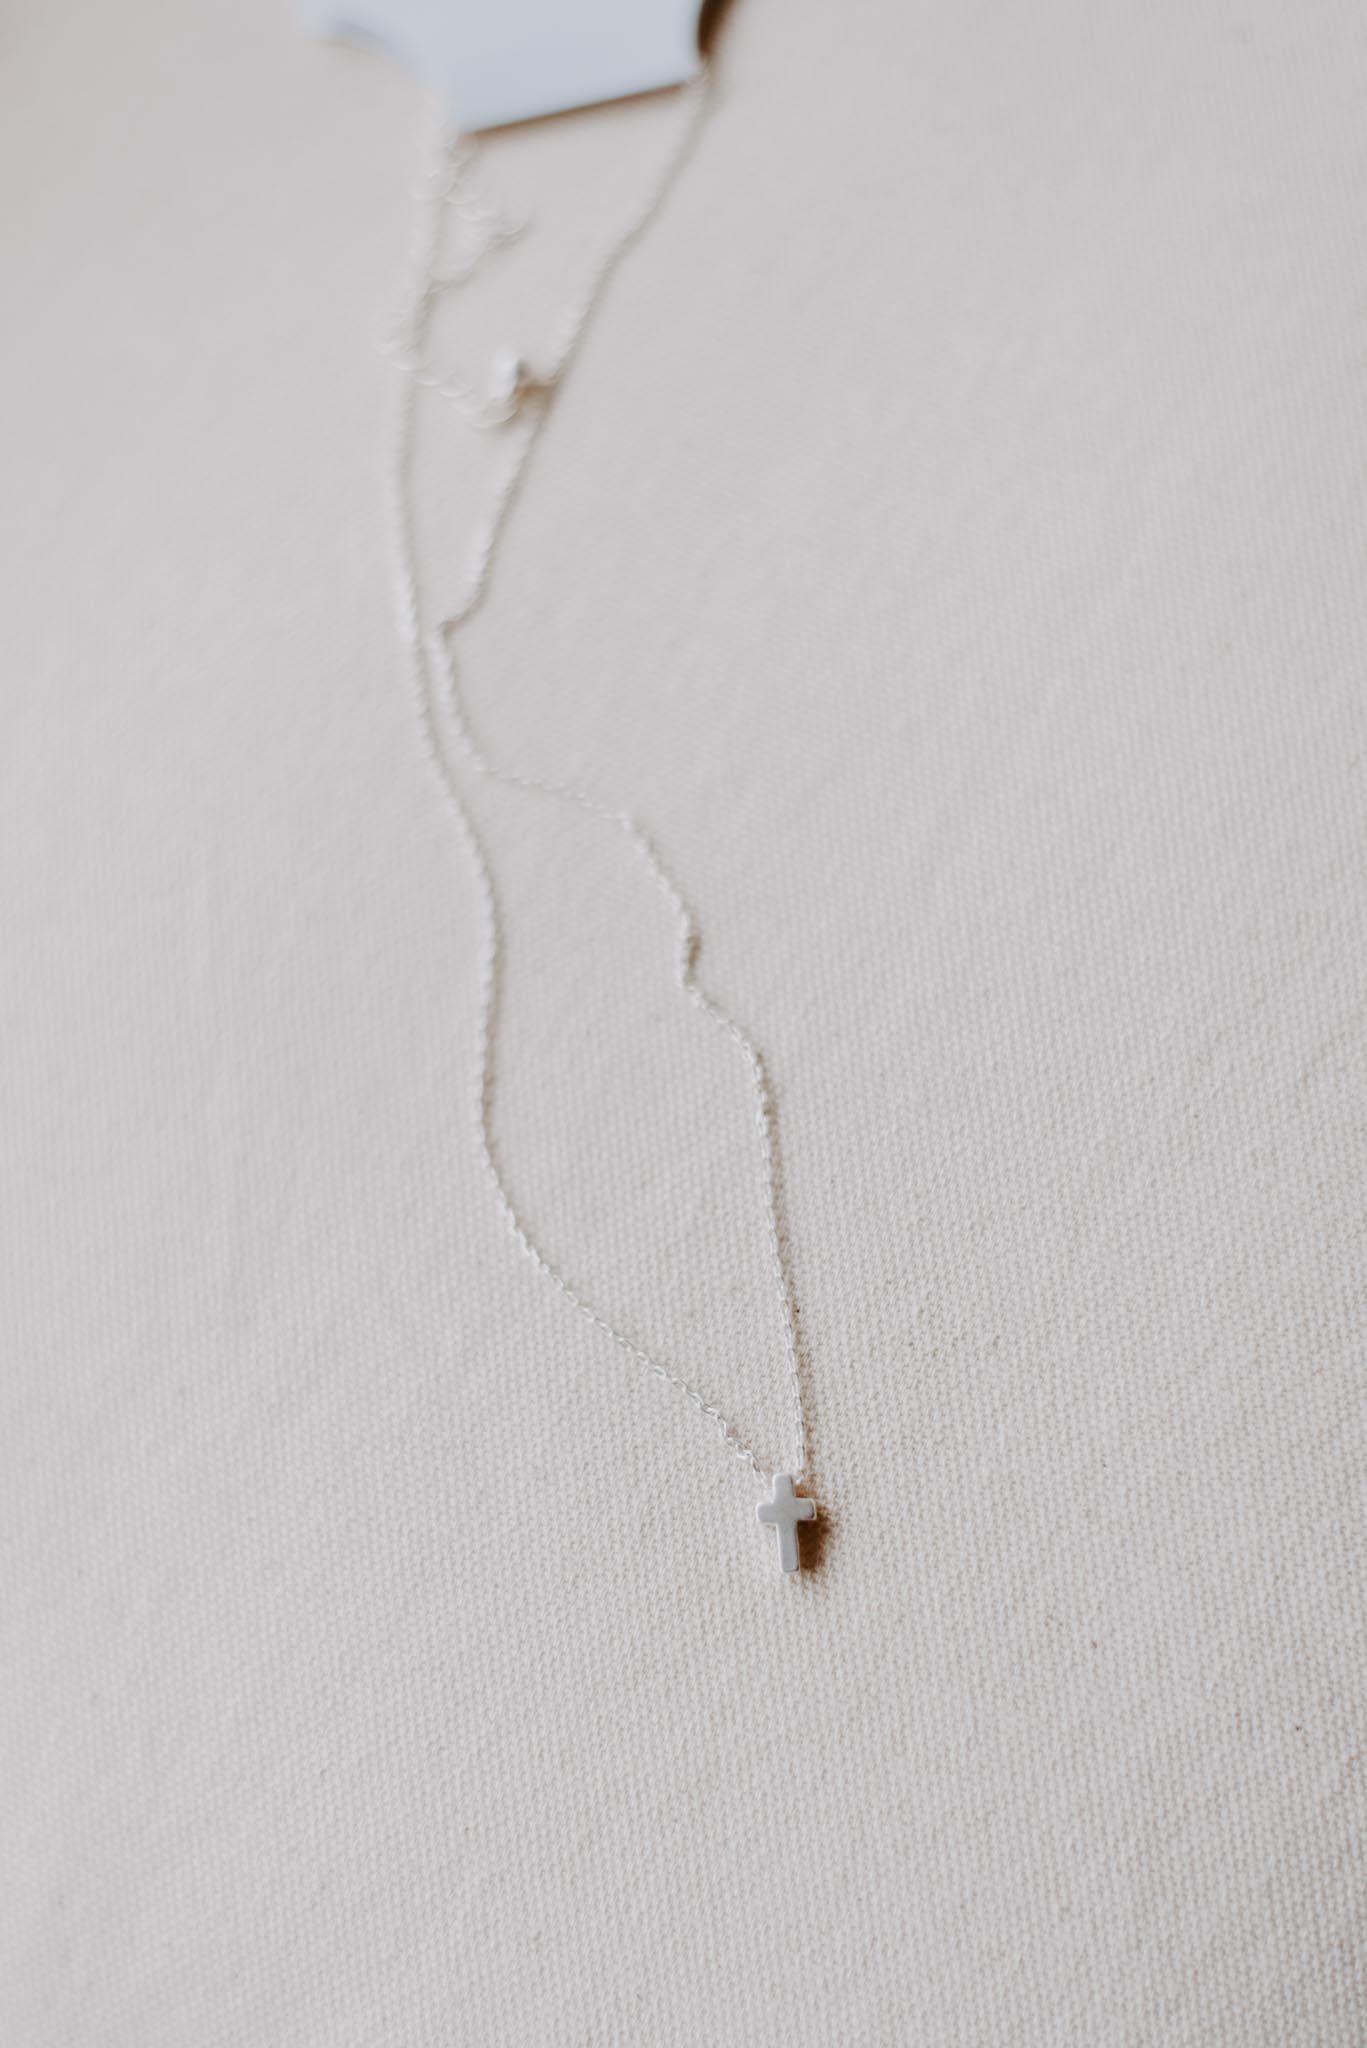 Load image into Gallery viewer, Dainty Cross Necklace
